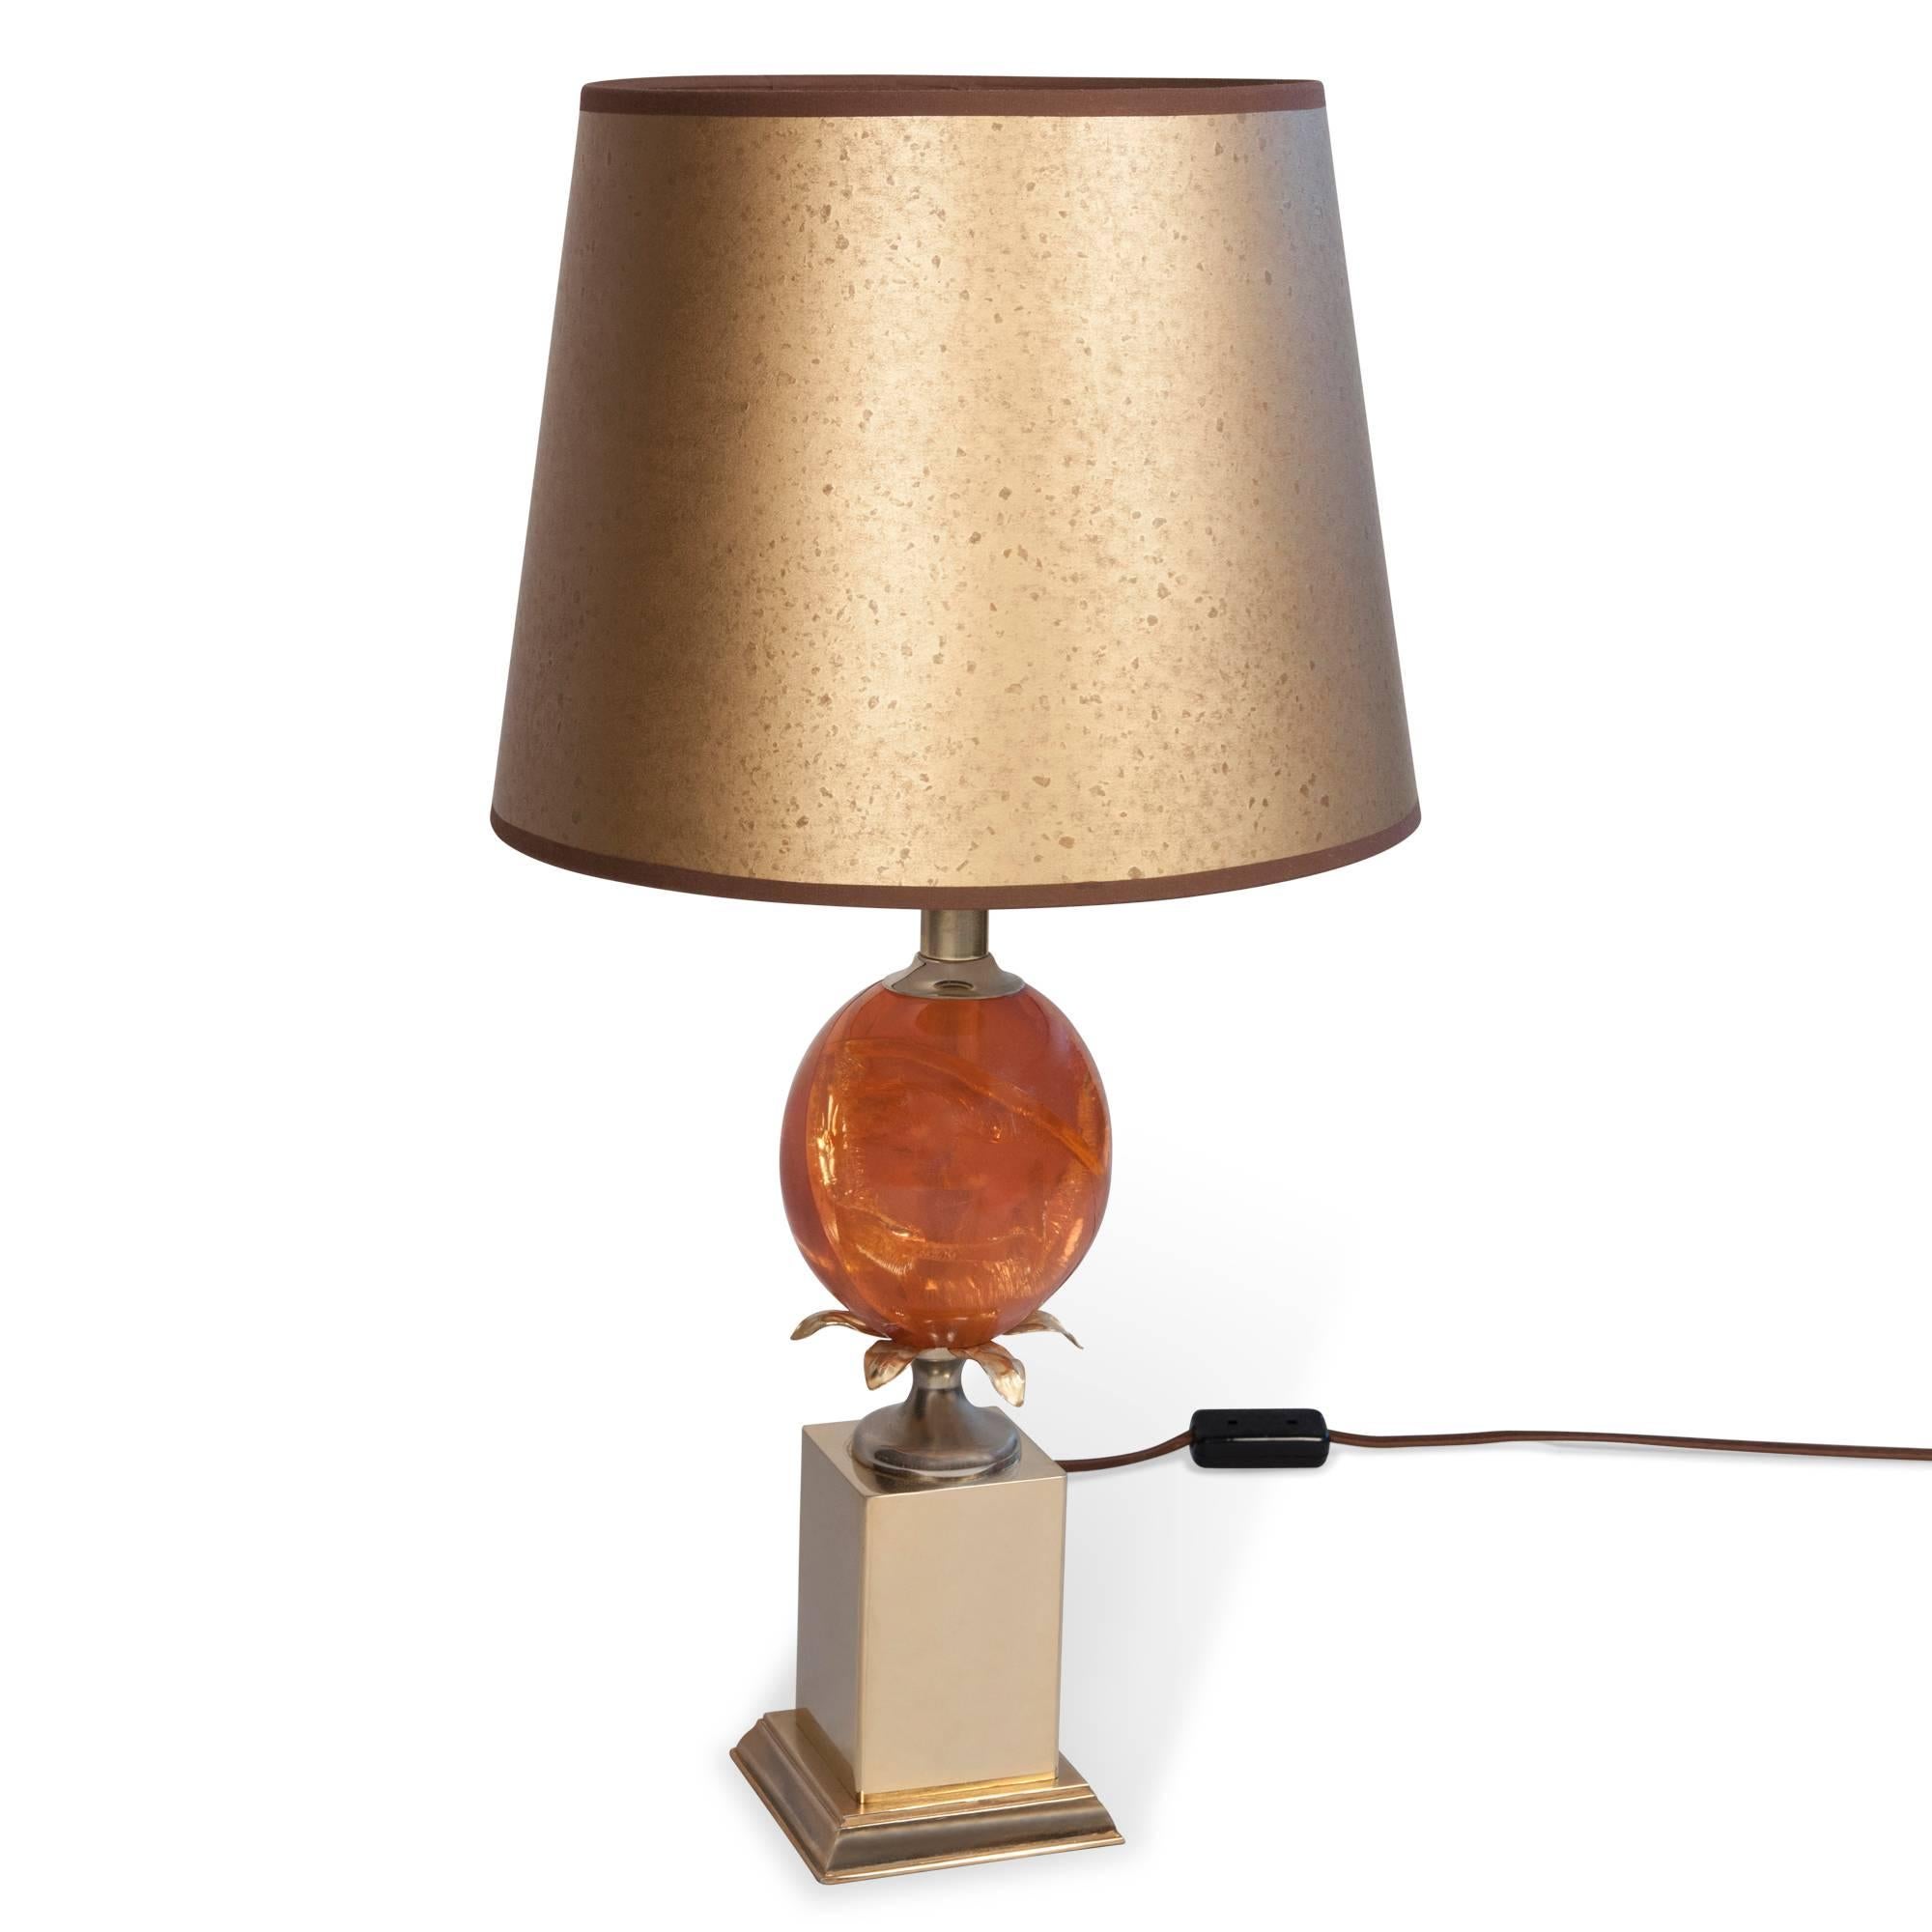 Fractured Resin Table Lamp, French, 1970s In Excellent Condition For Sale In Brooklyn, NY